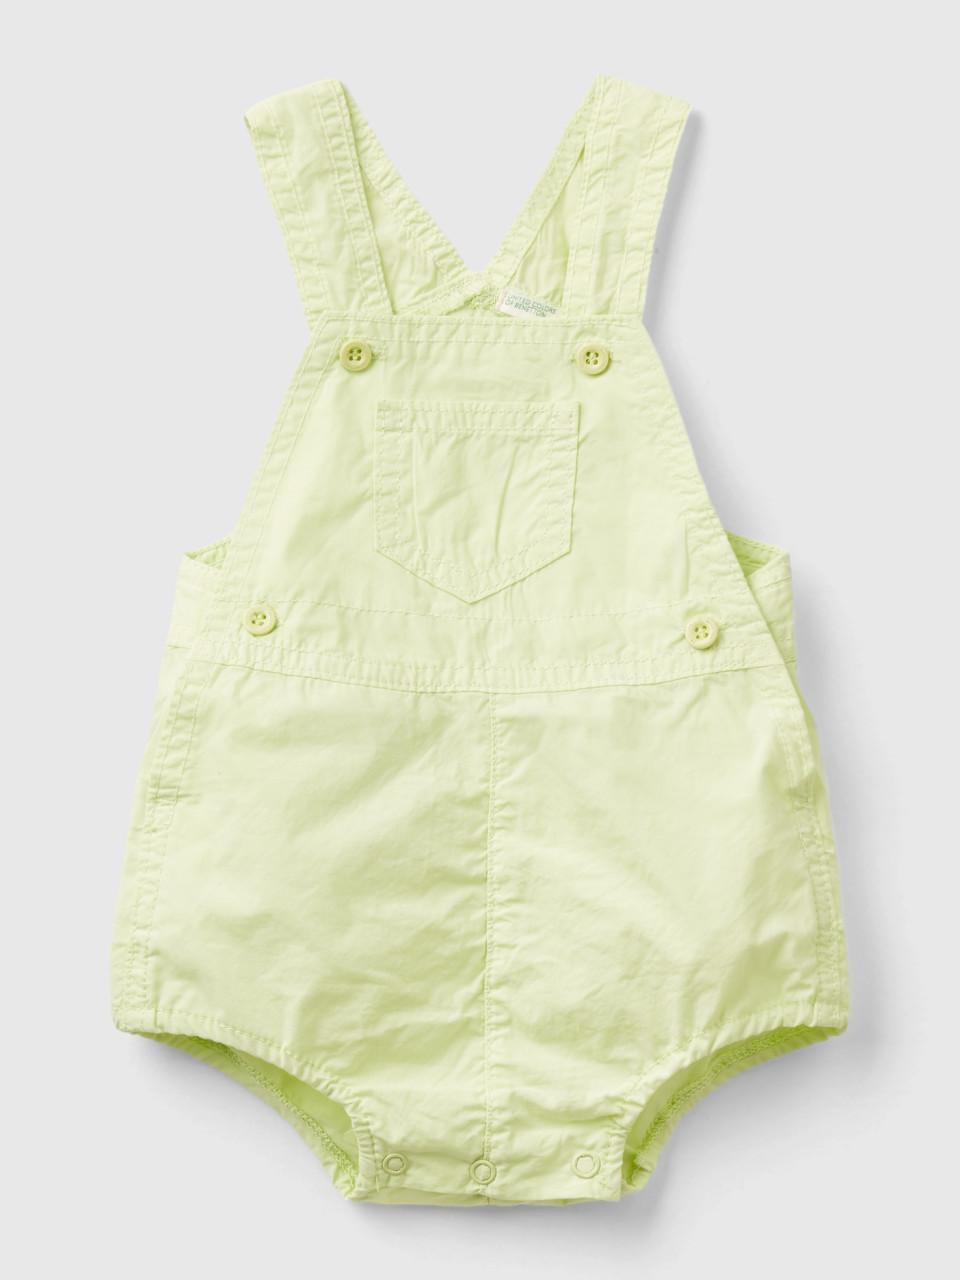 Benetton, Overall Onesie In 100% Cotton, Lime, Kids